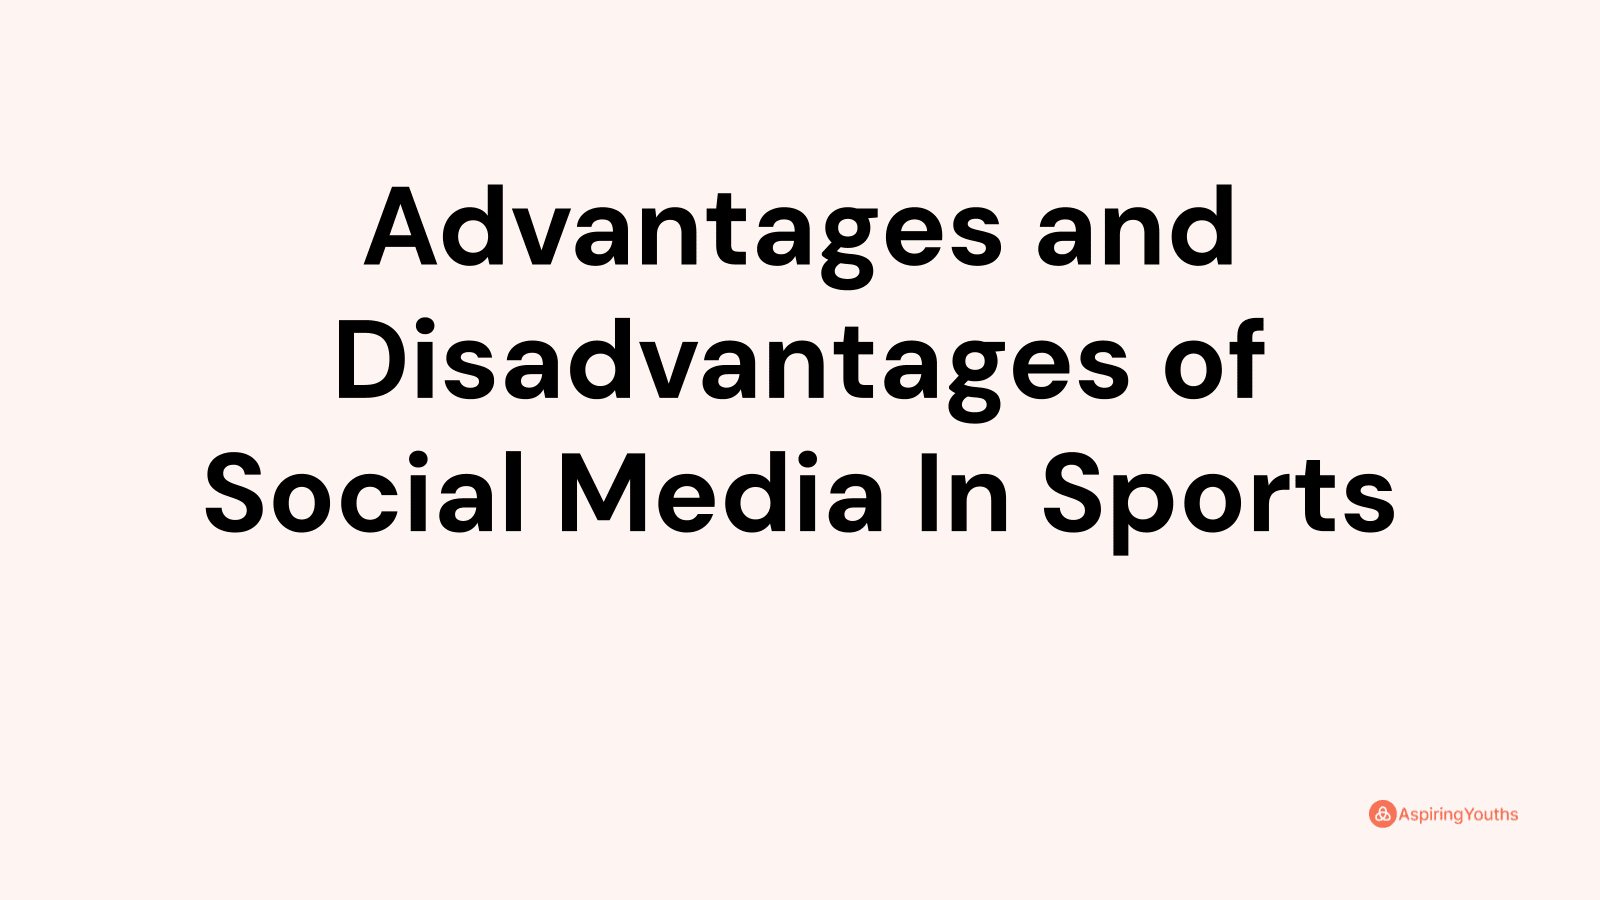 Advantages and disadvantages of Social Media In Sports